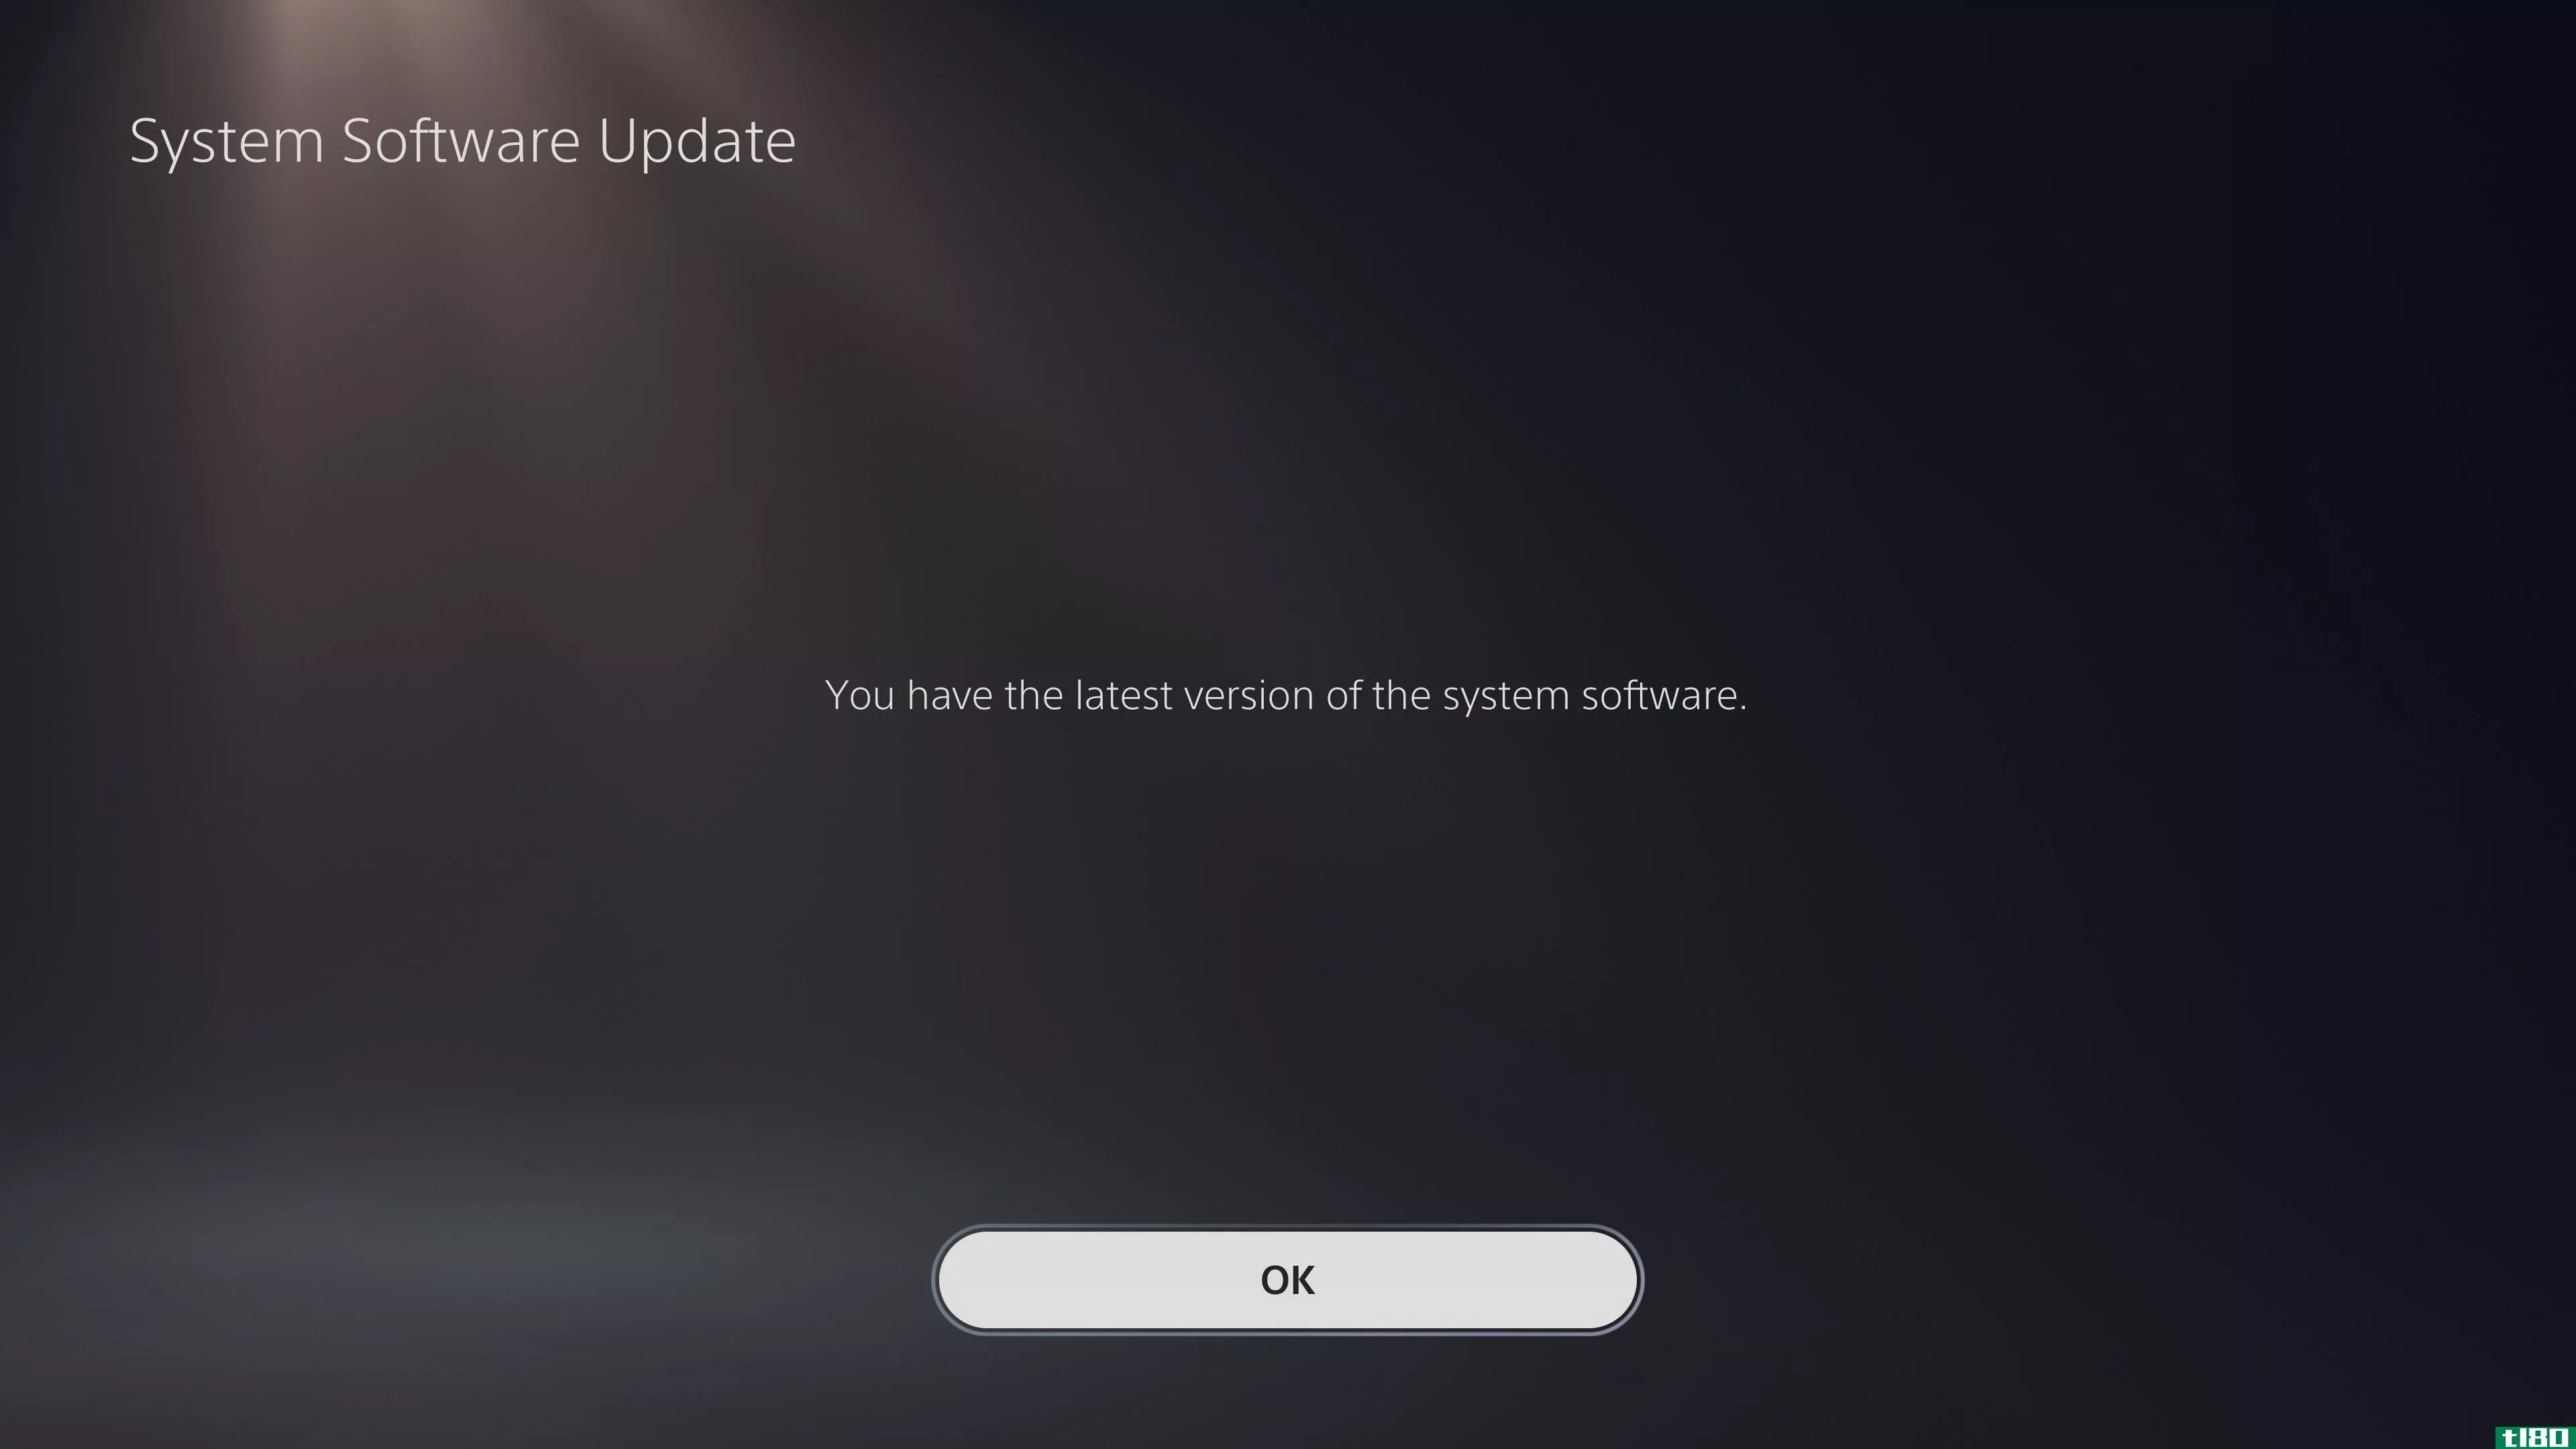 PS5 Latest Software Installed